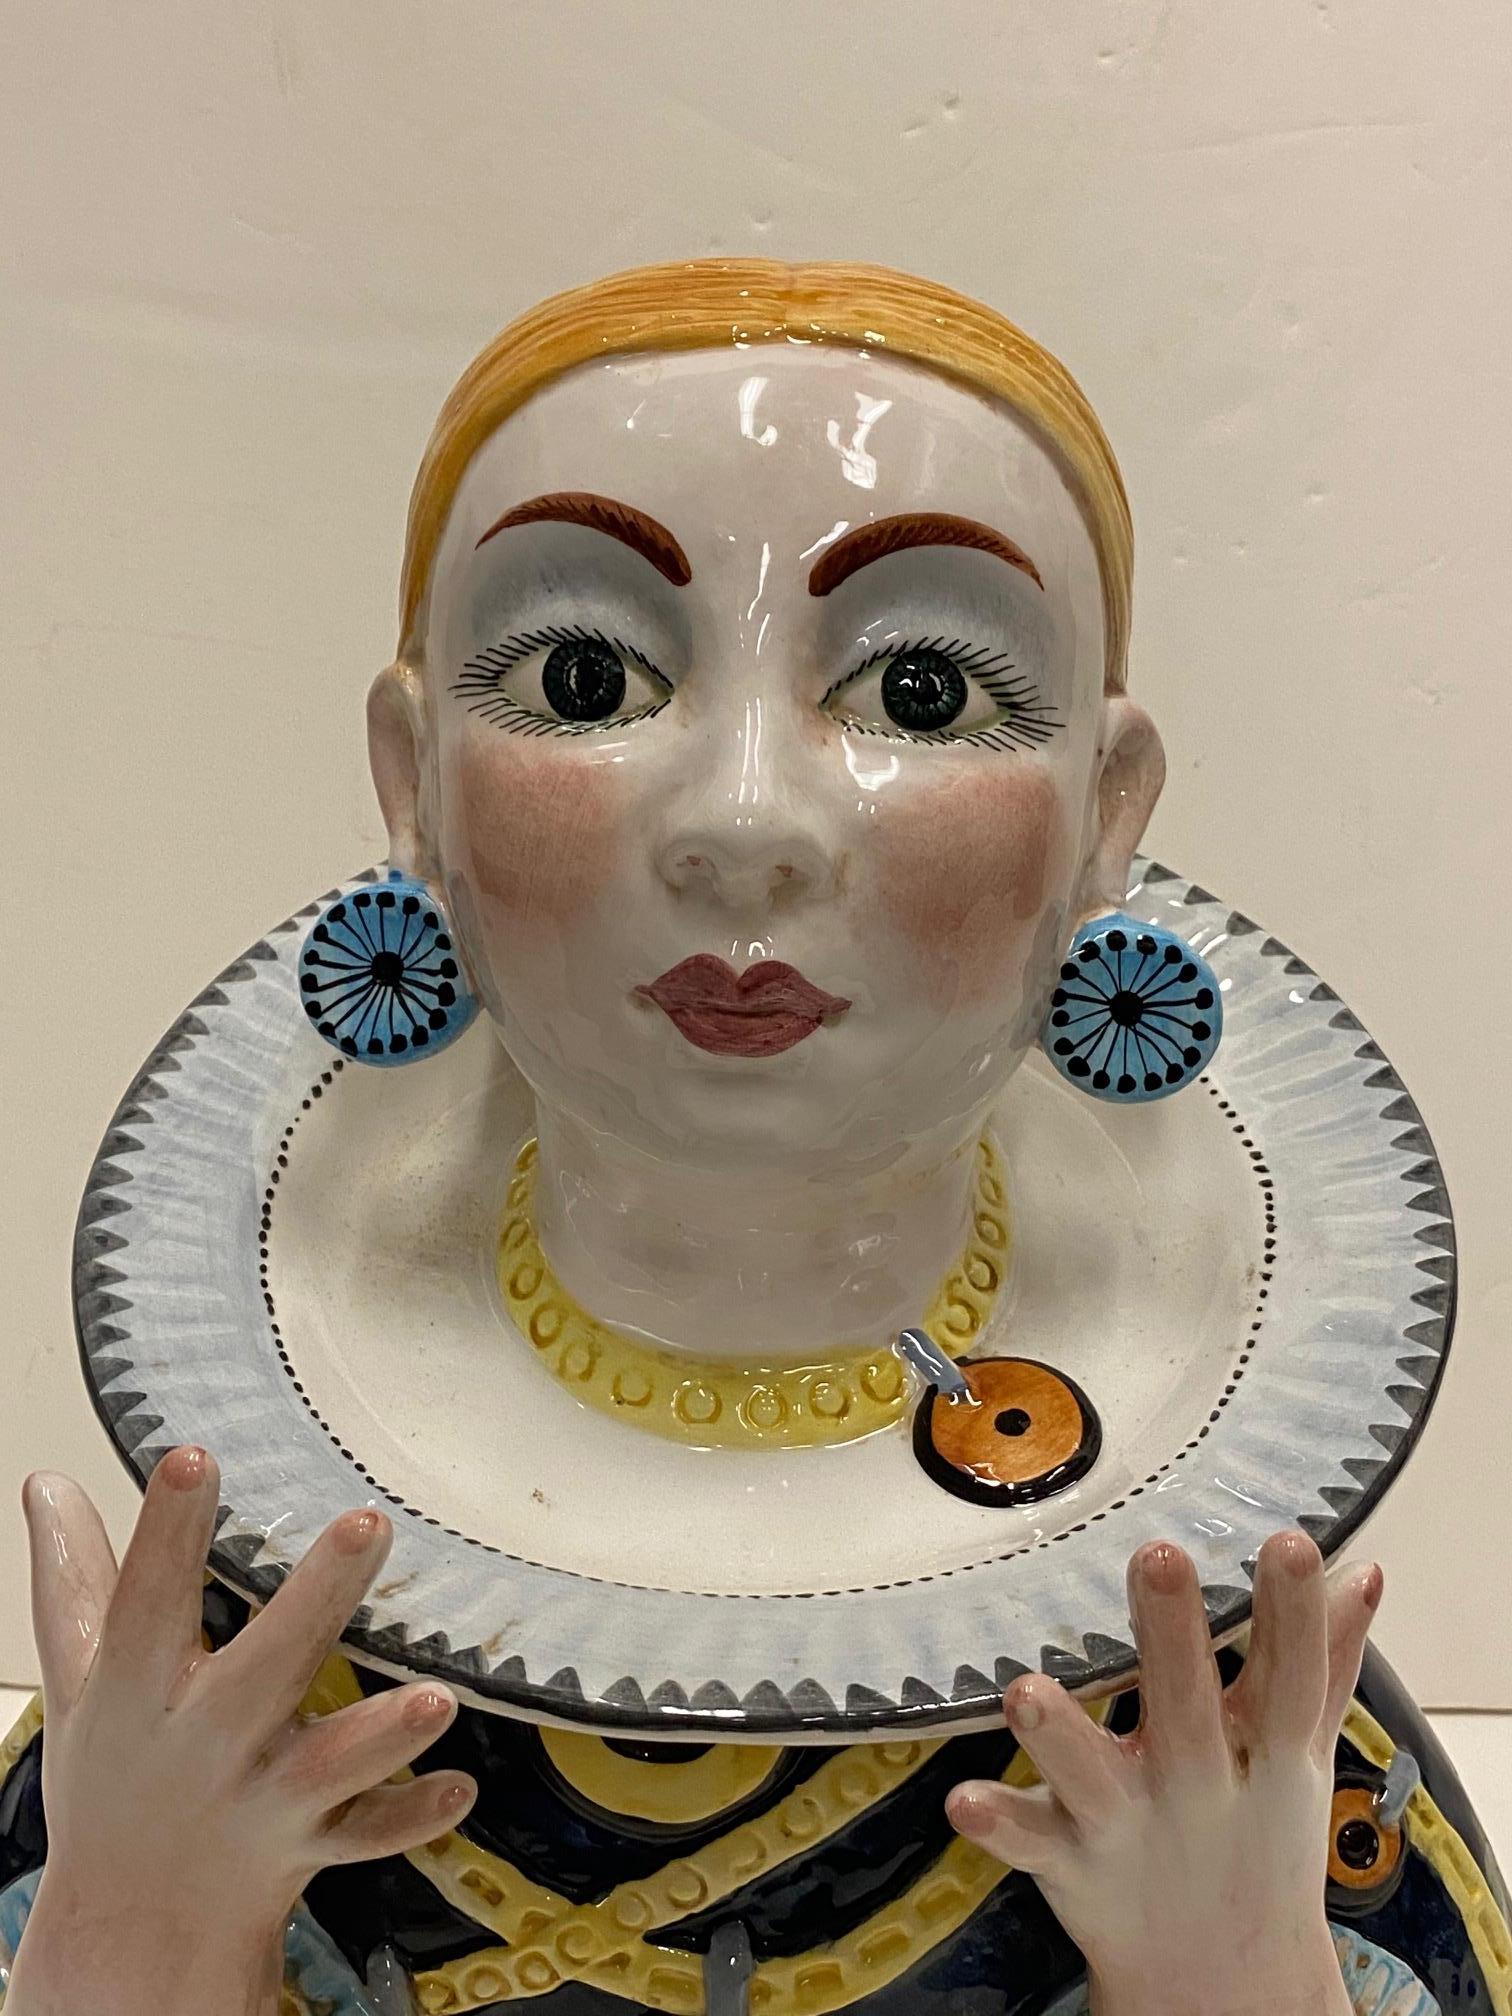 Very unusual fun glazed Italian bust of a woman hand painted in vibrant colors.
Says made in Italy, with artist's initials on the bottom.